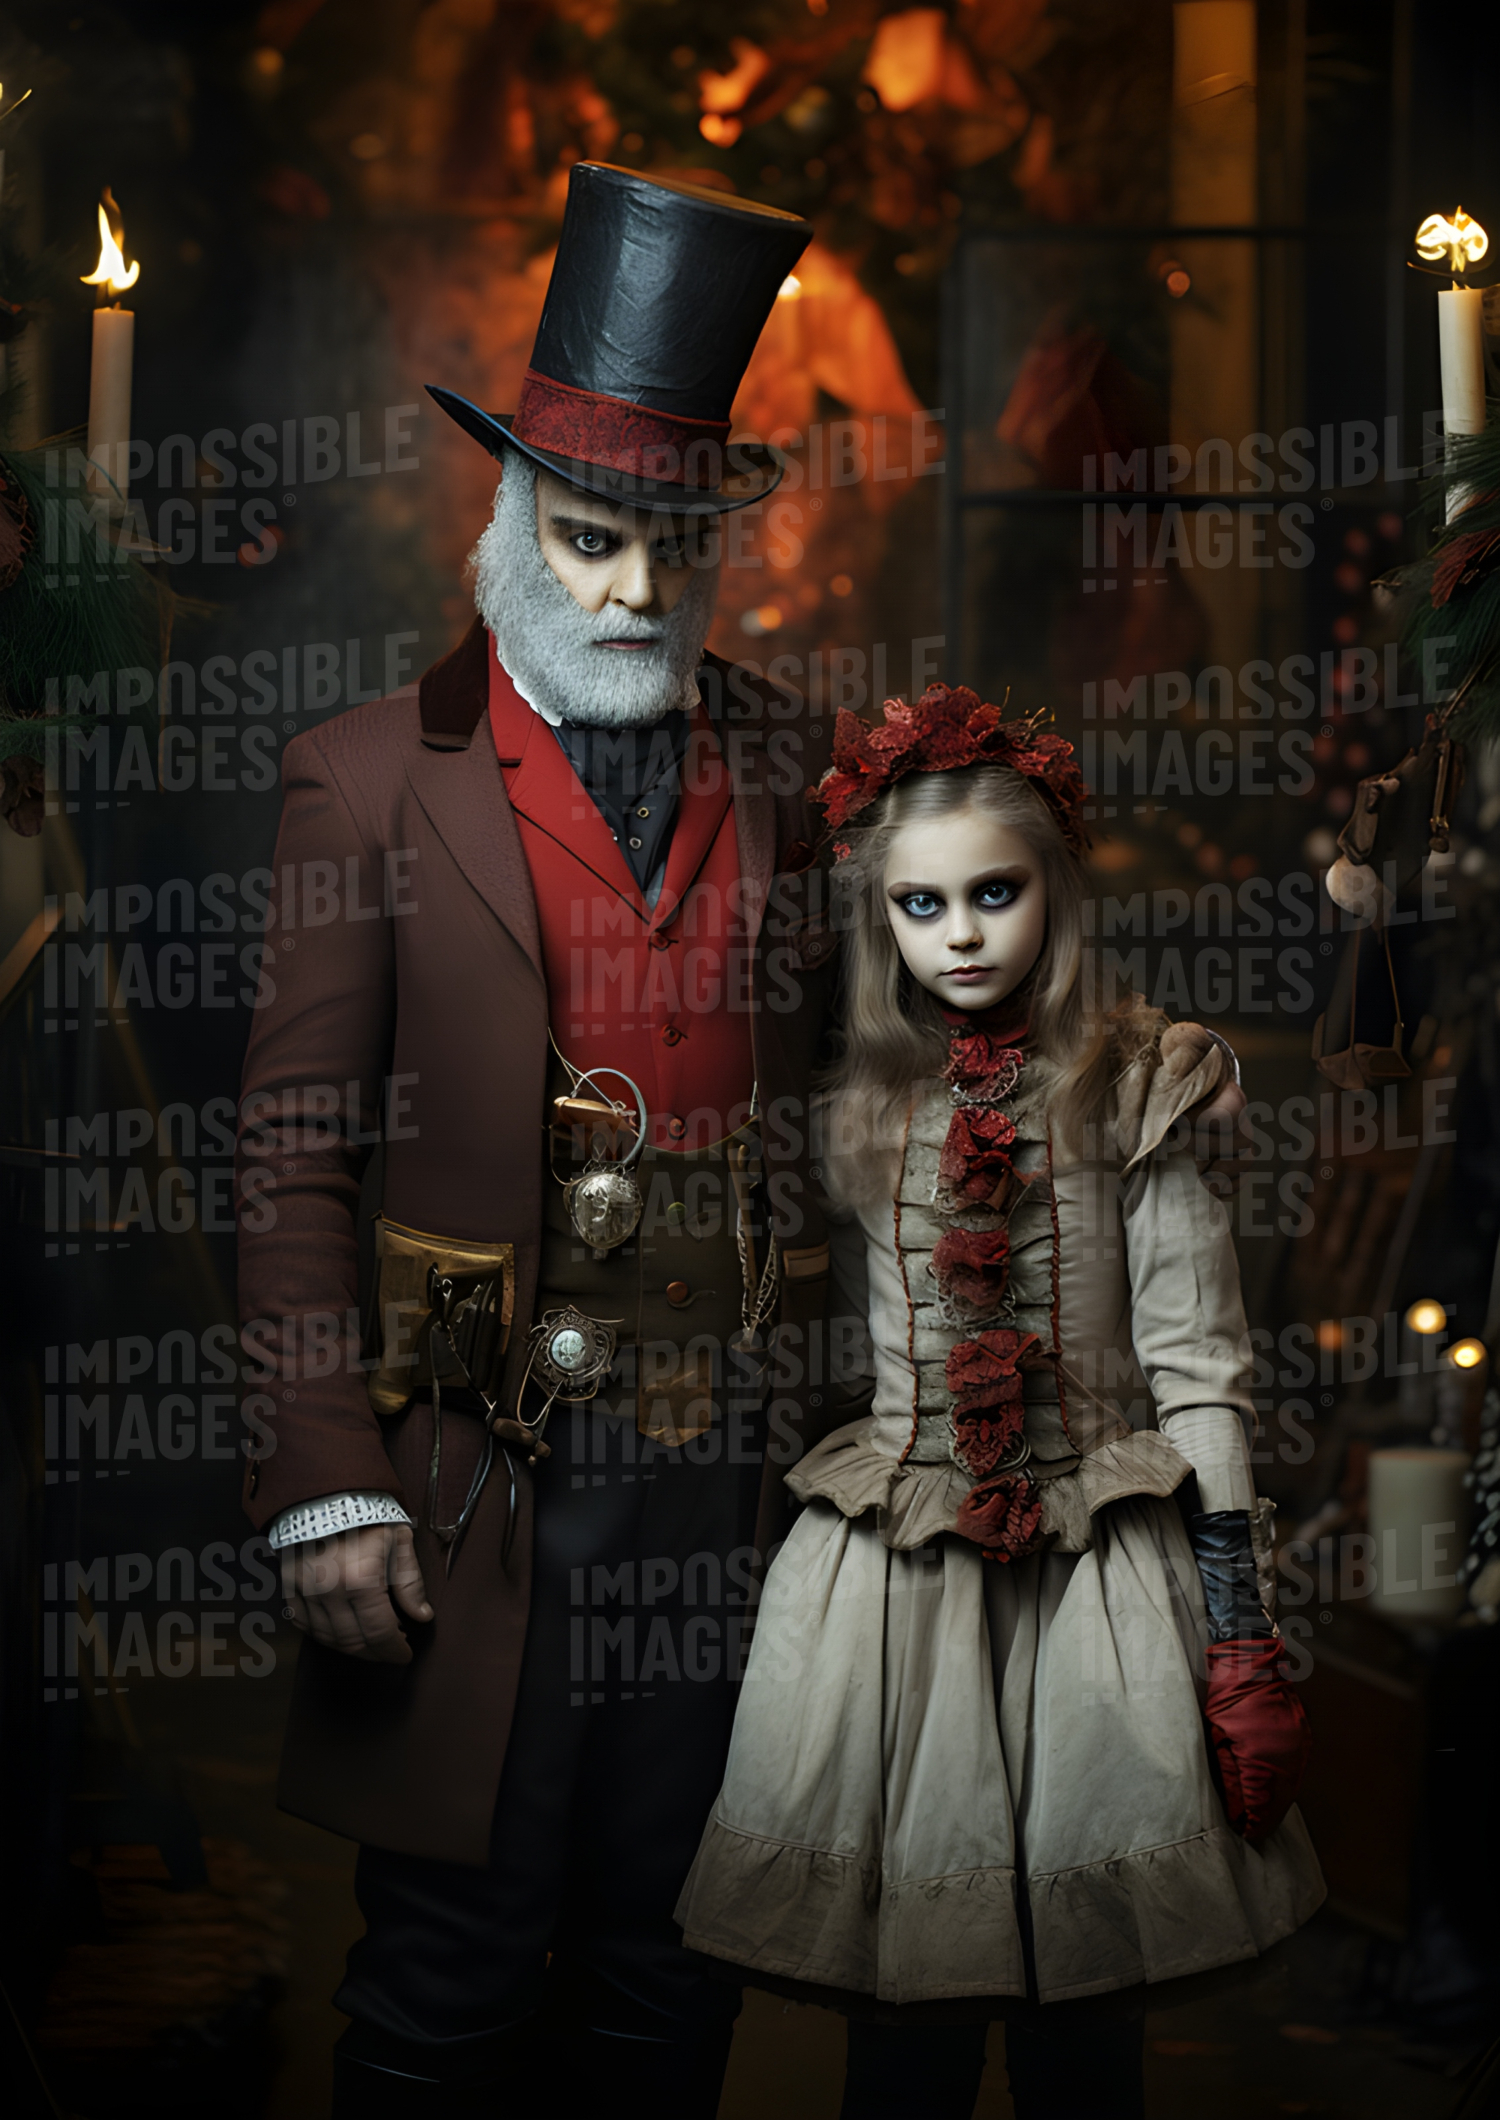 A man and young girl wearing Christmas Halloween costumes